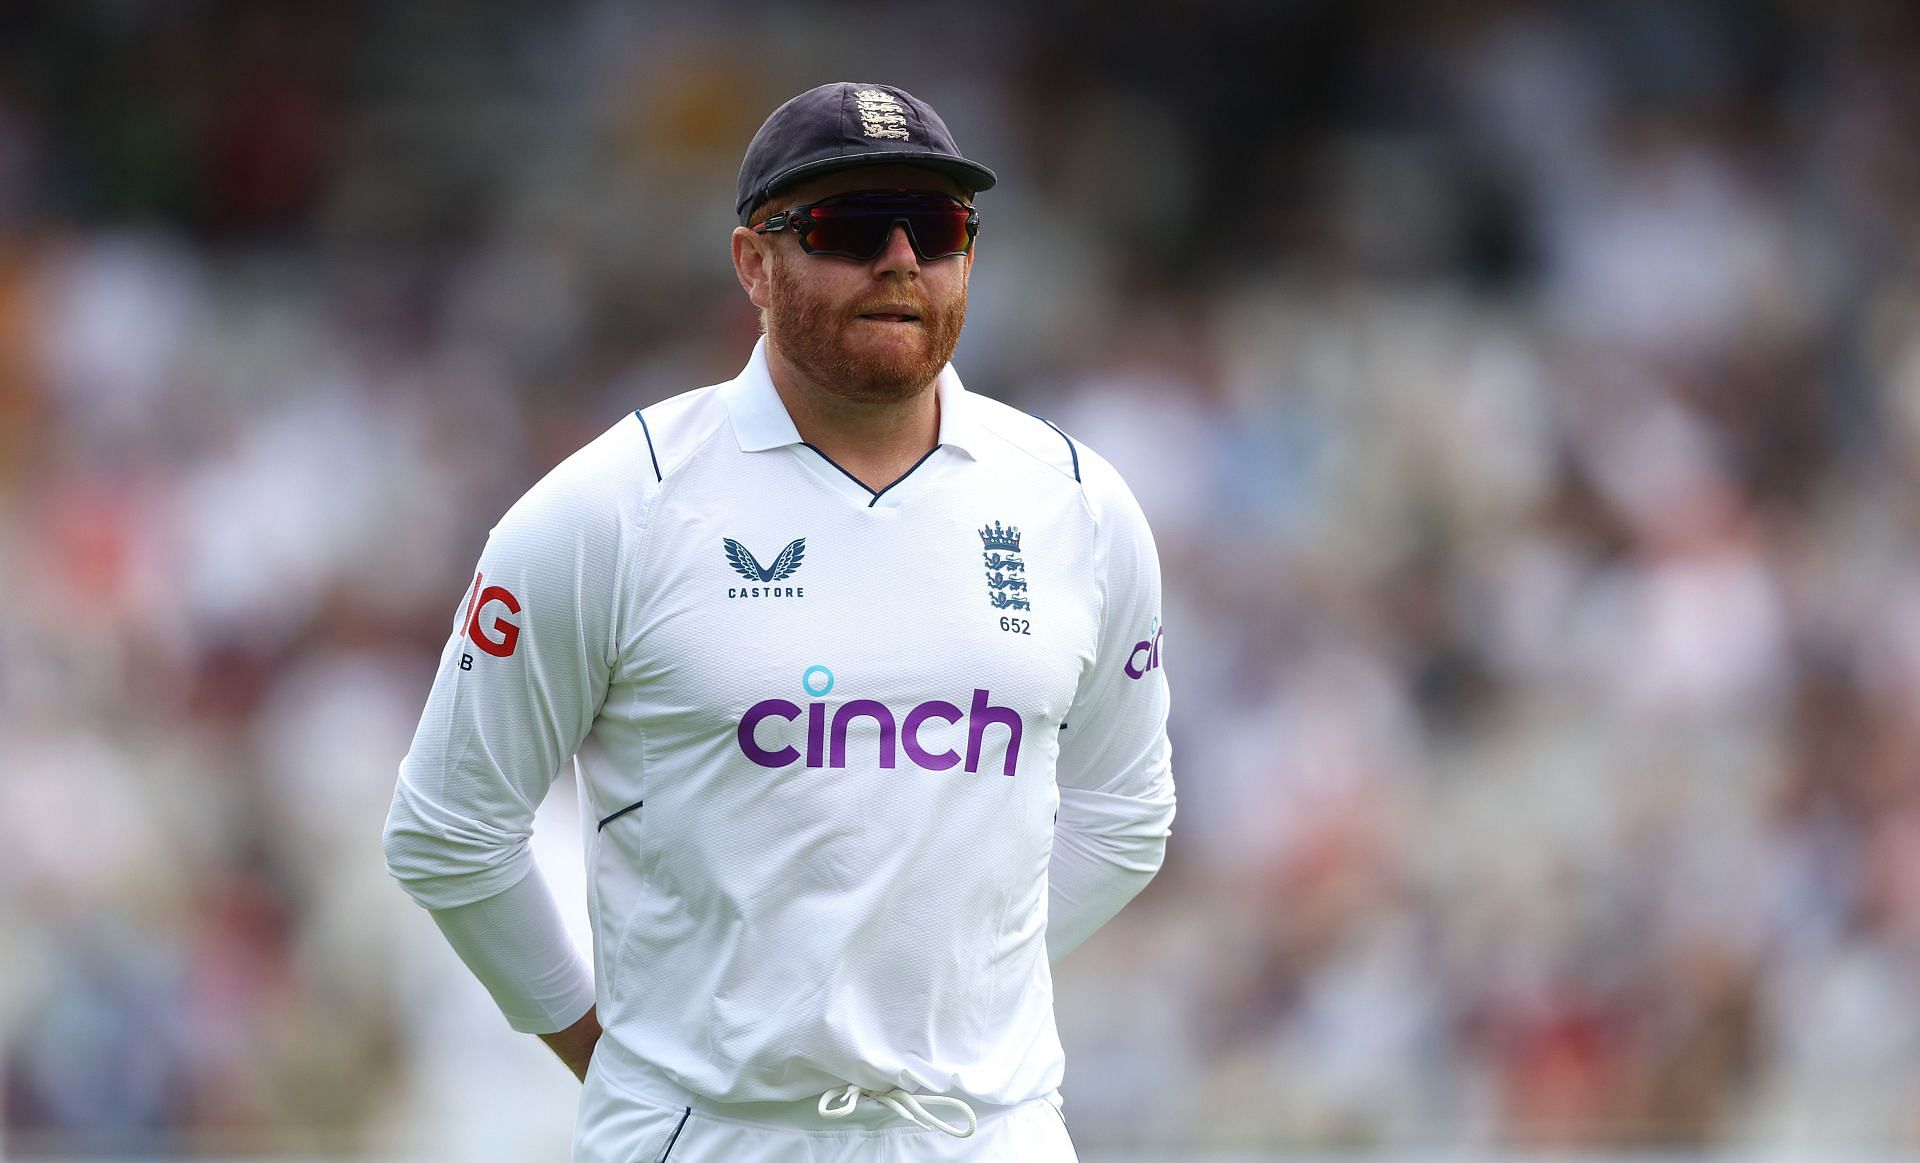 Jonny Bairstow was in rampaging form before his injury. (Credits: Getty)